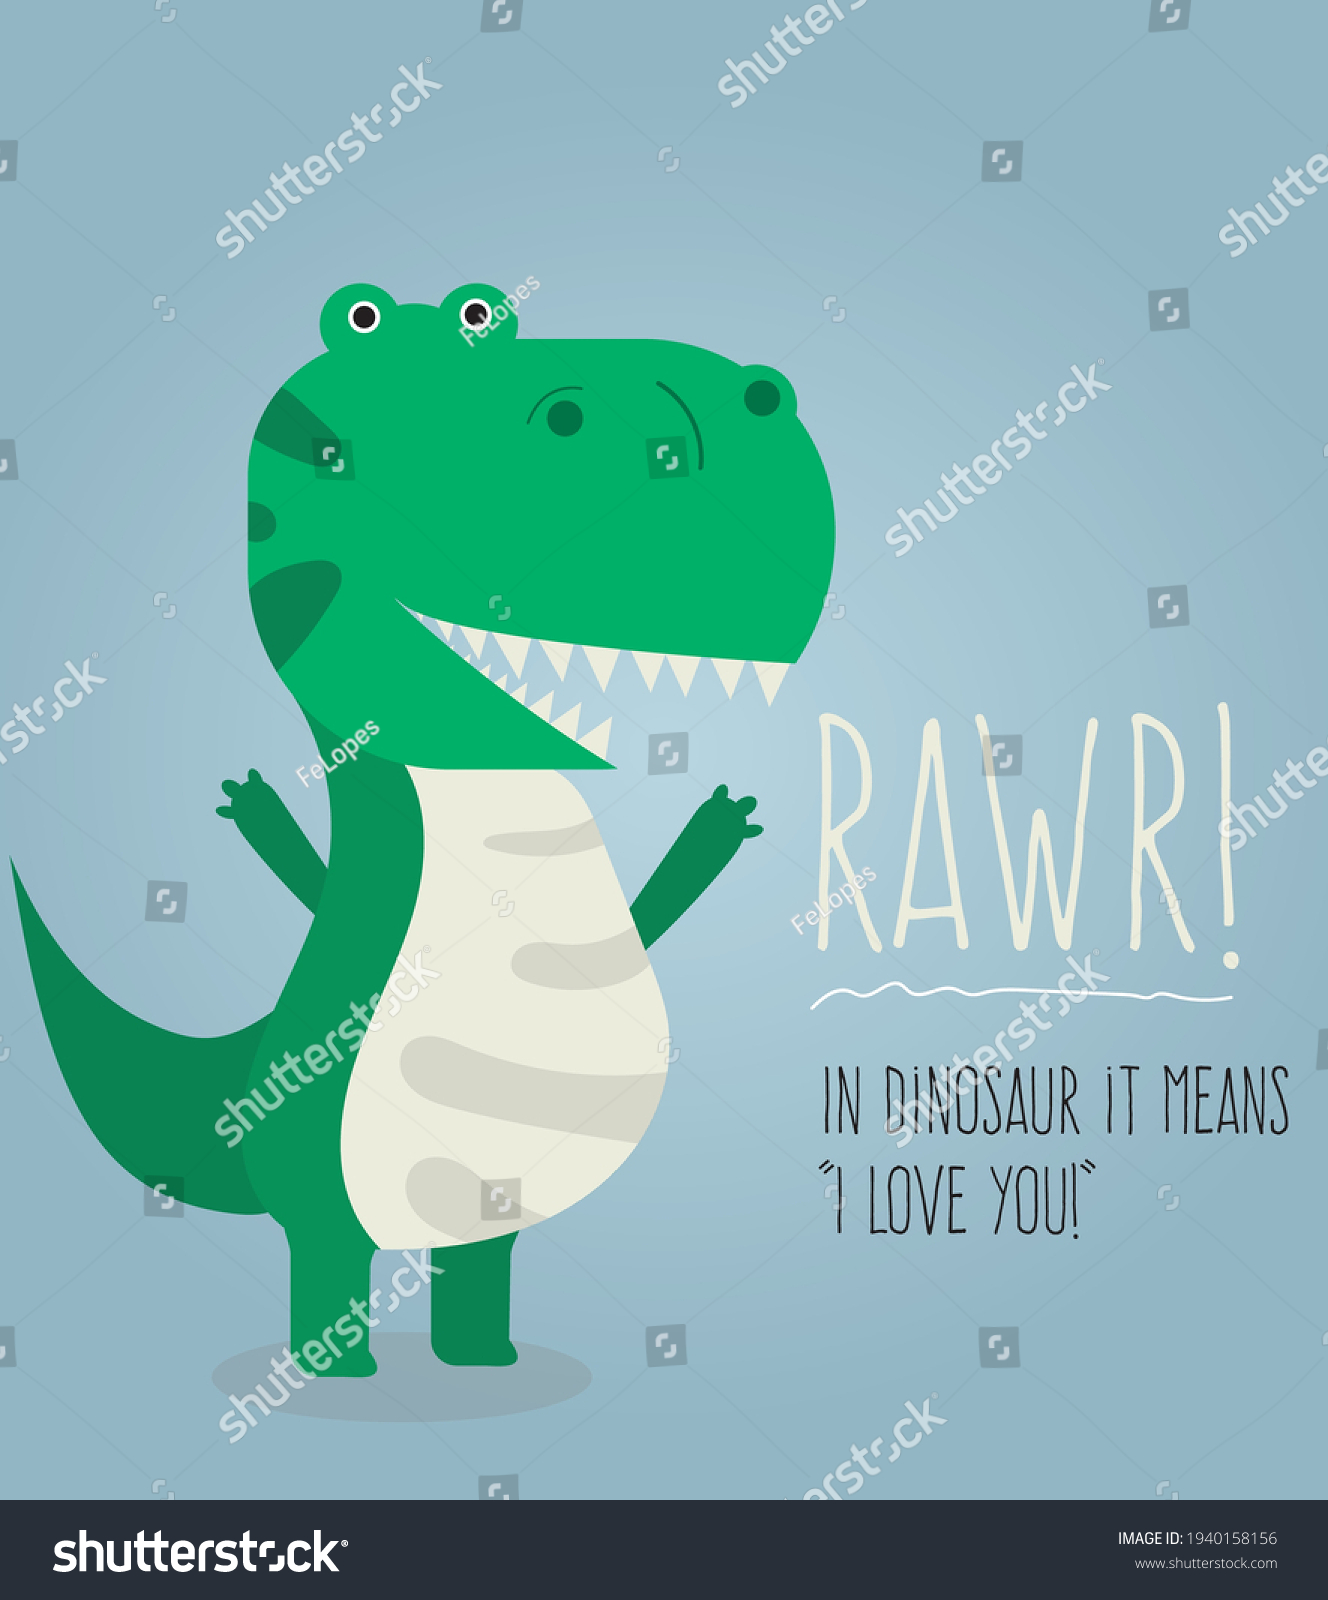 SVG of cute green dinosaur roar or screaming or shouting rawr with the saying 'rawr means i love you in dinosaur'. vector eps 10 illustration svg